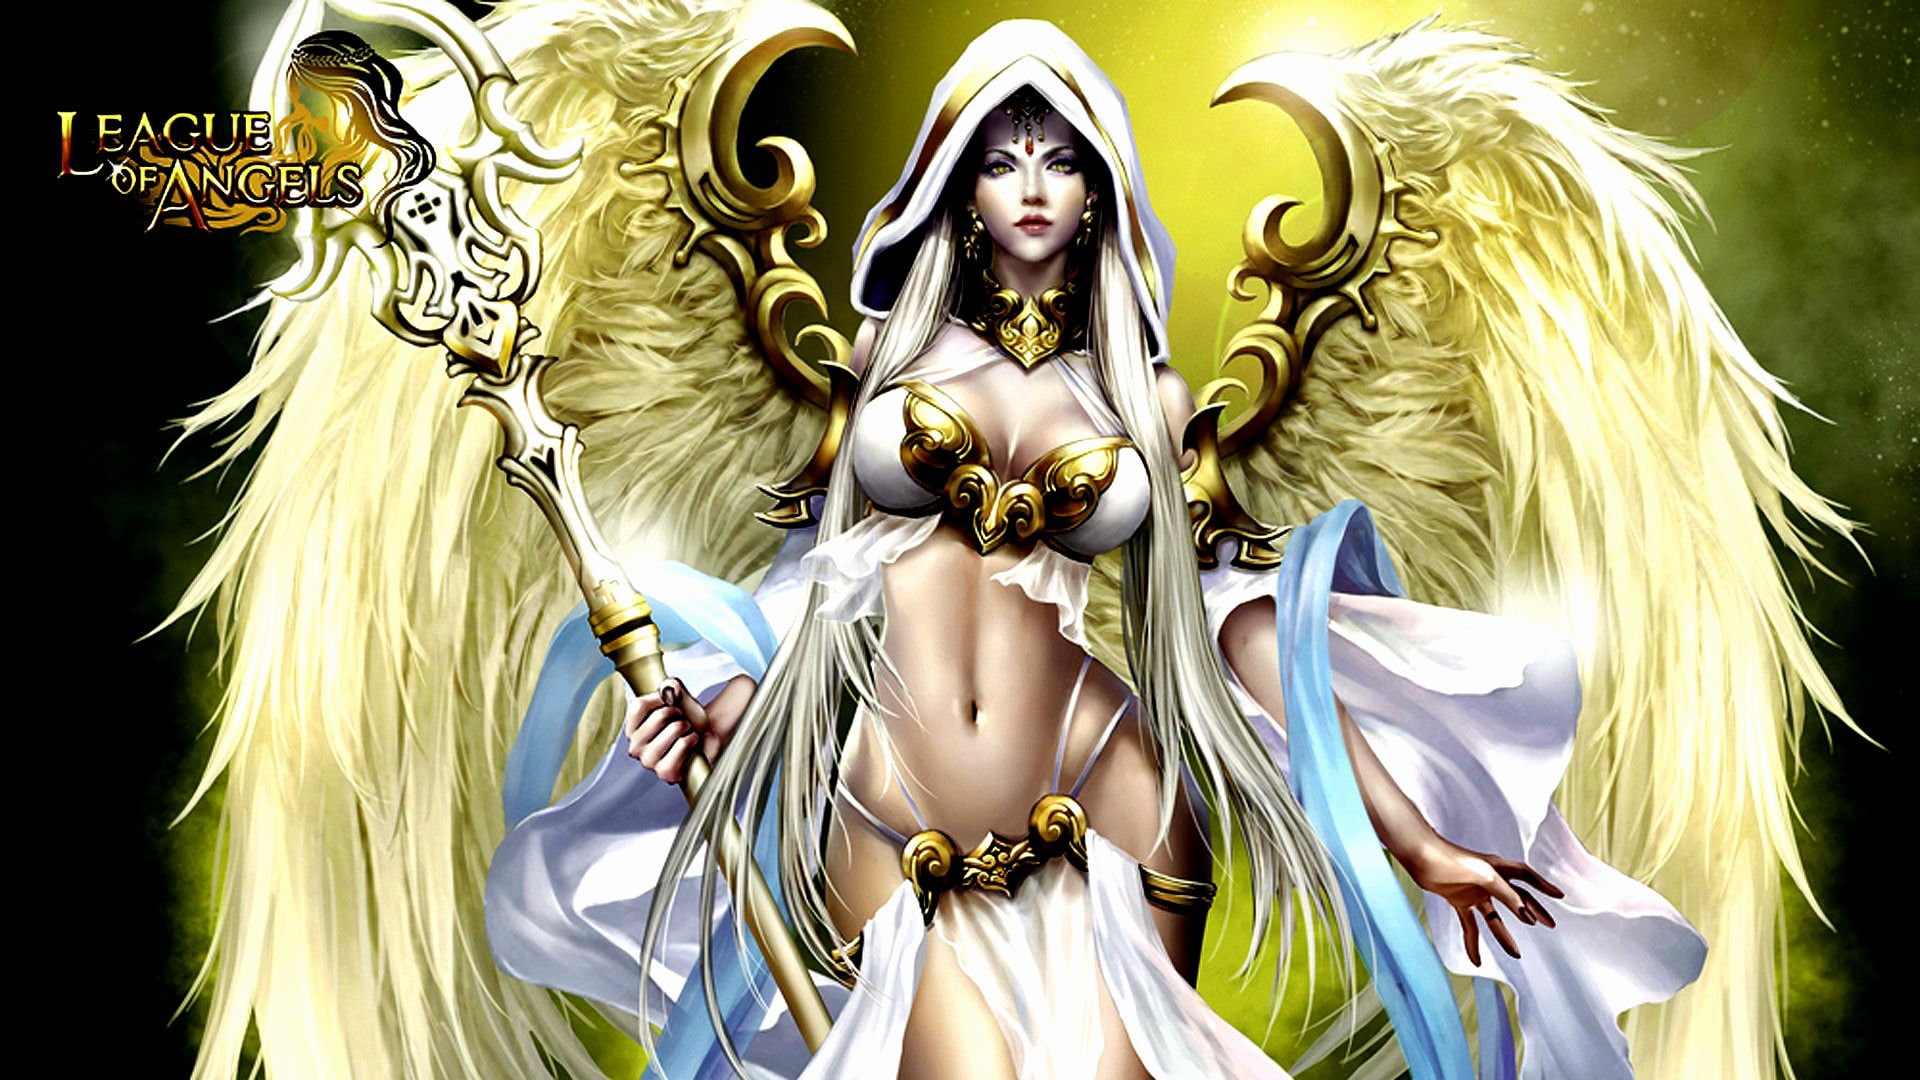 1920x1080 px, angel, angels, fantasy, game, league, Loa, of